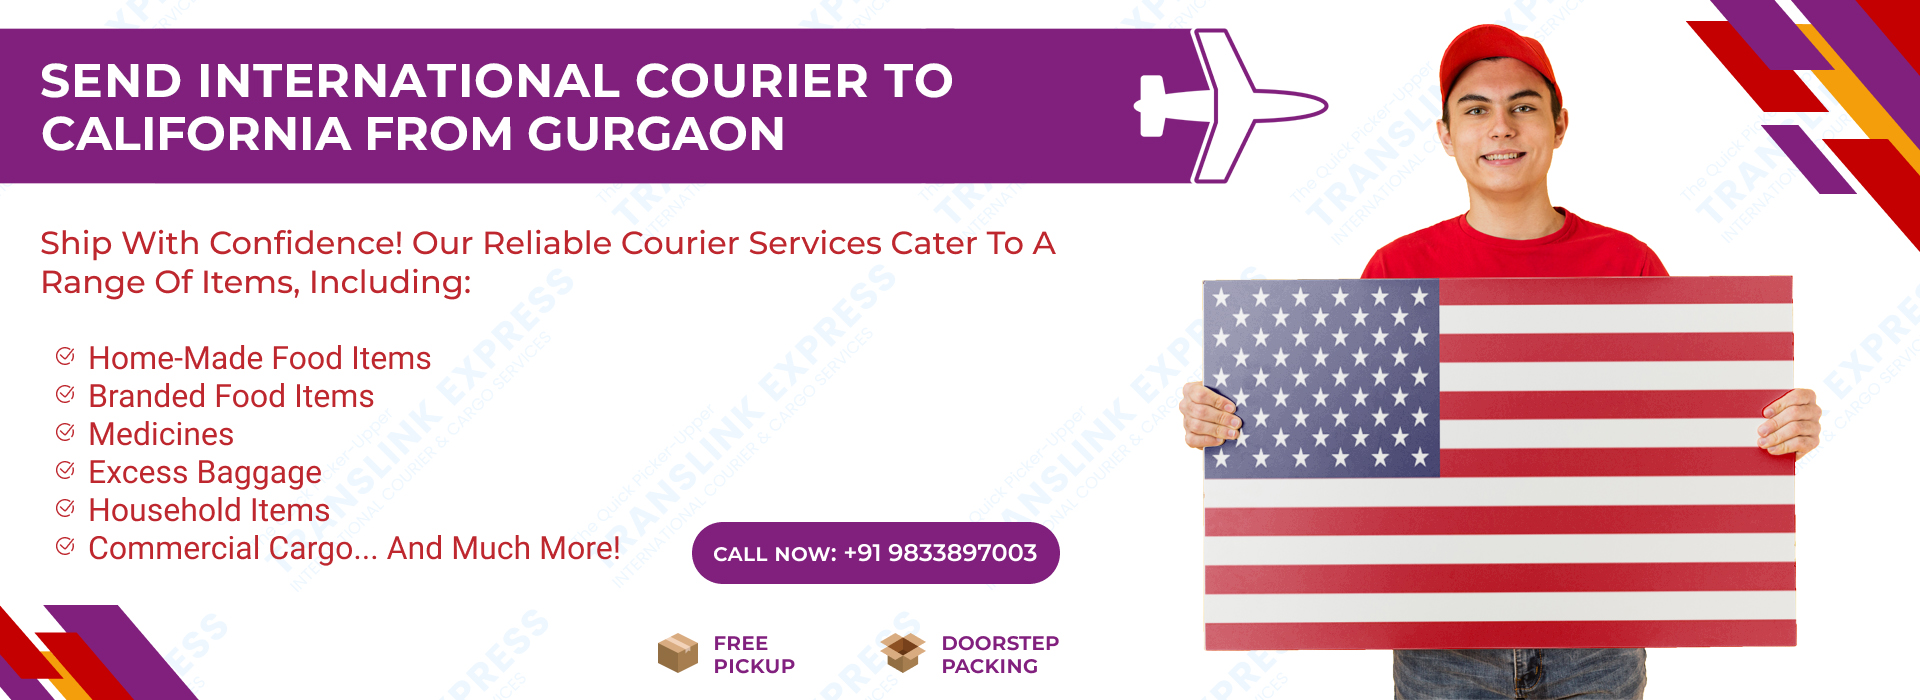 Courier to California From Gurgaon